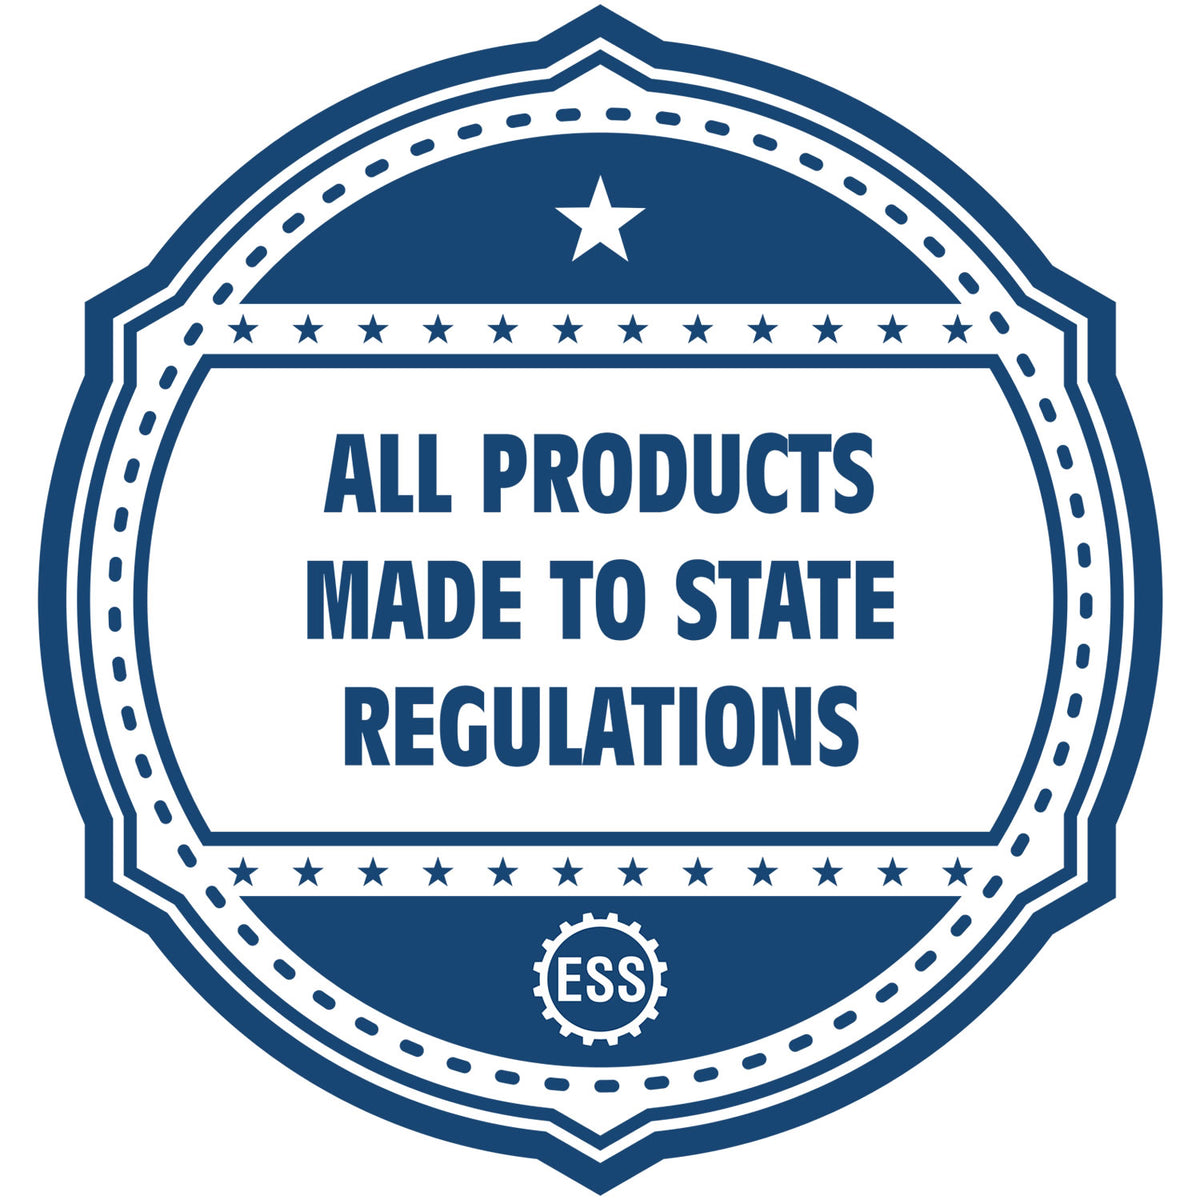 An icon or badge element for the Wooden Handle Iowa State Seal Notary Public Stamp showing that this product is made in compliance with state regulations.